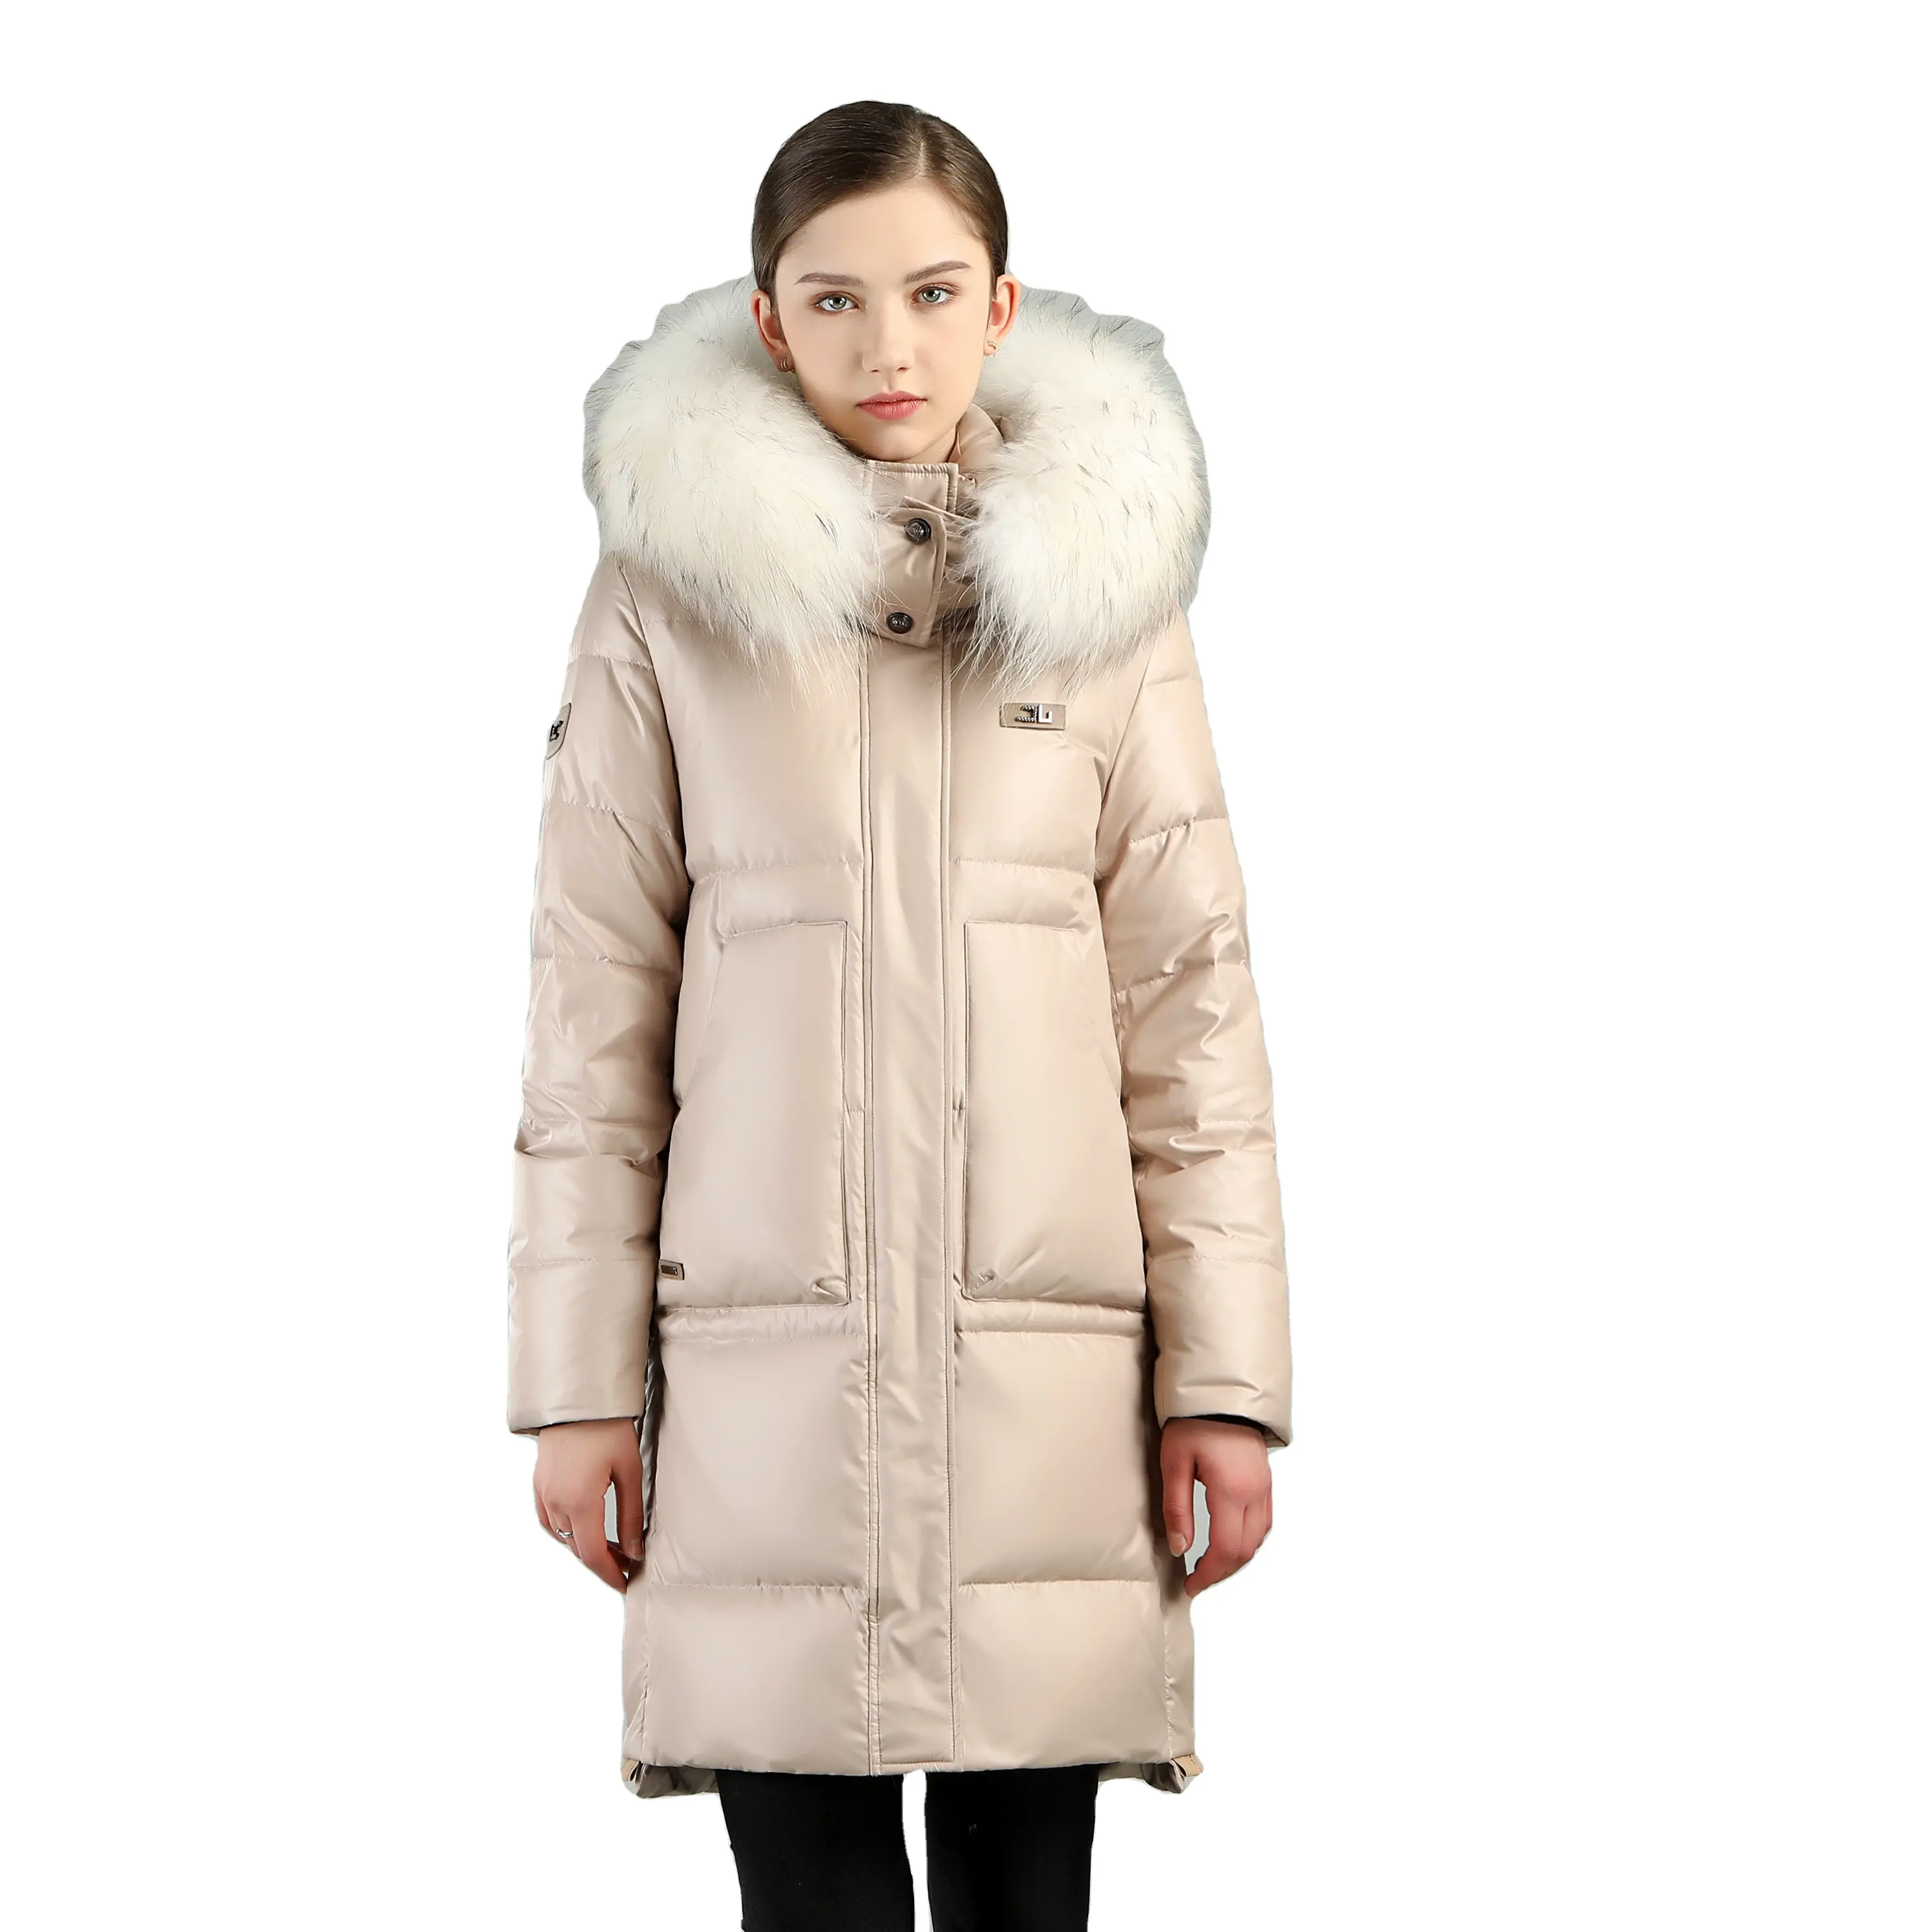 2023 High quality fashion oversized windbreaker winter puffer duck down winter jacket woman coats for ladies chaquetas de mujer